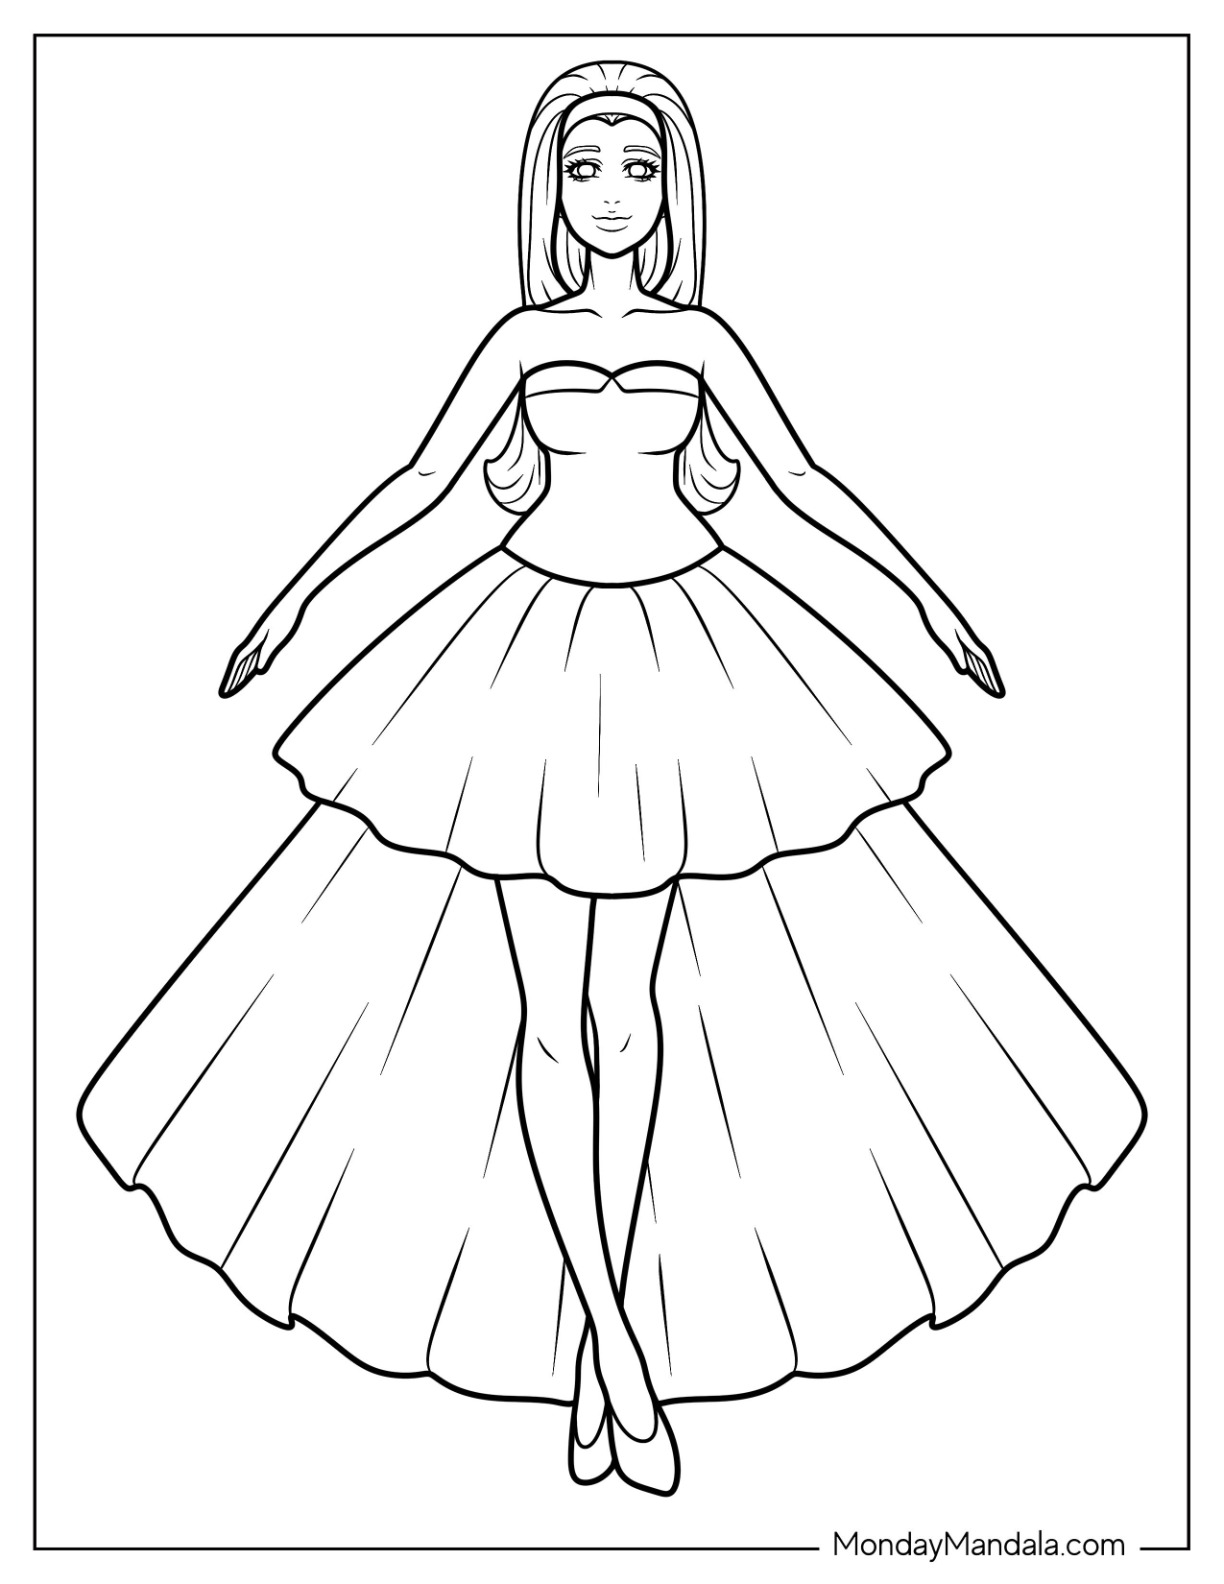 Dress coloring pages free pdf printables